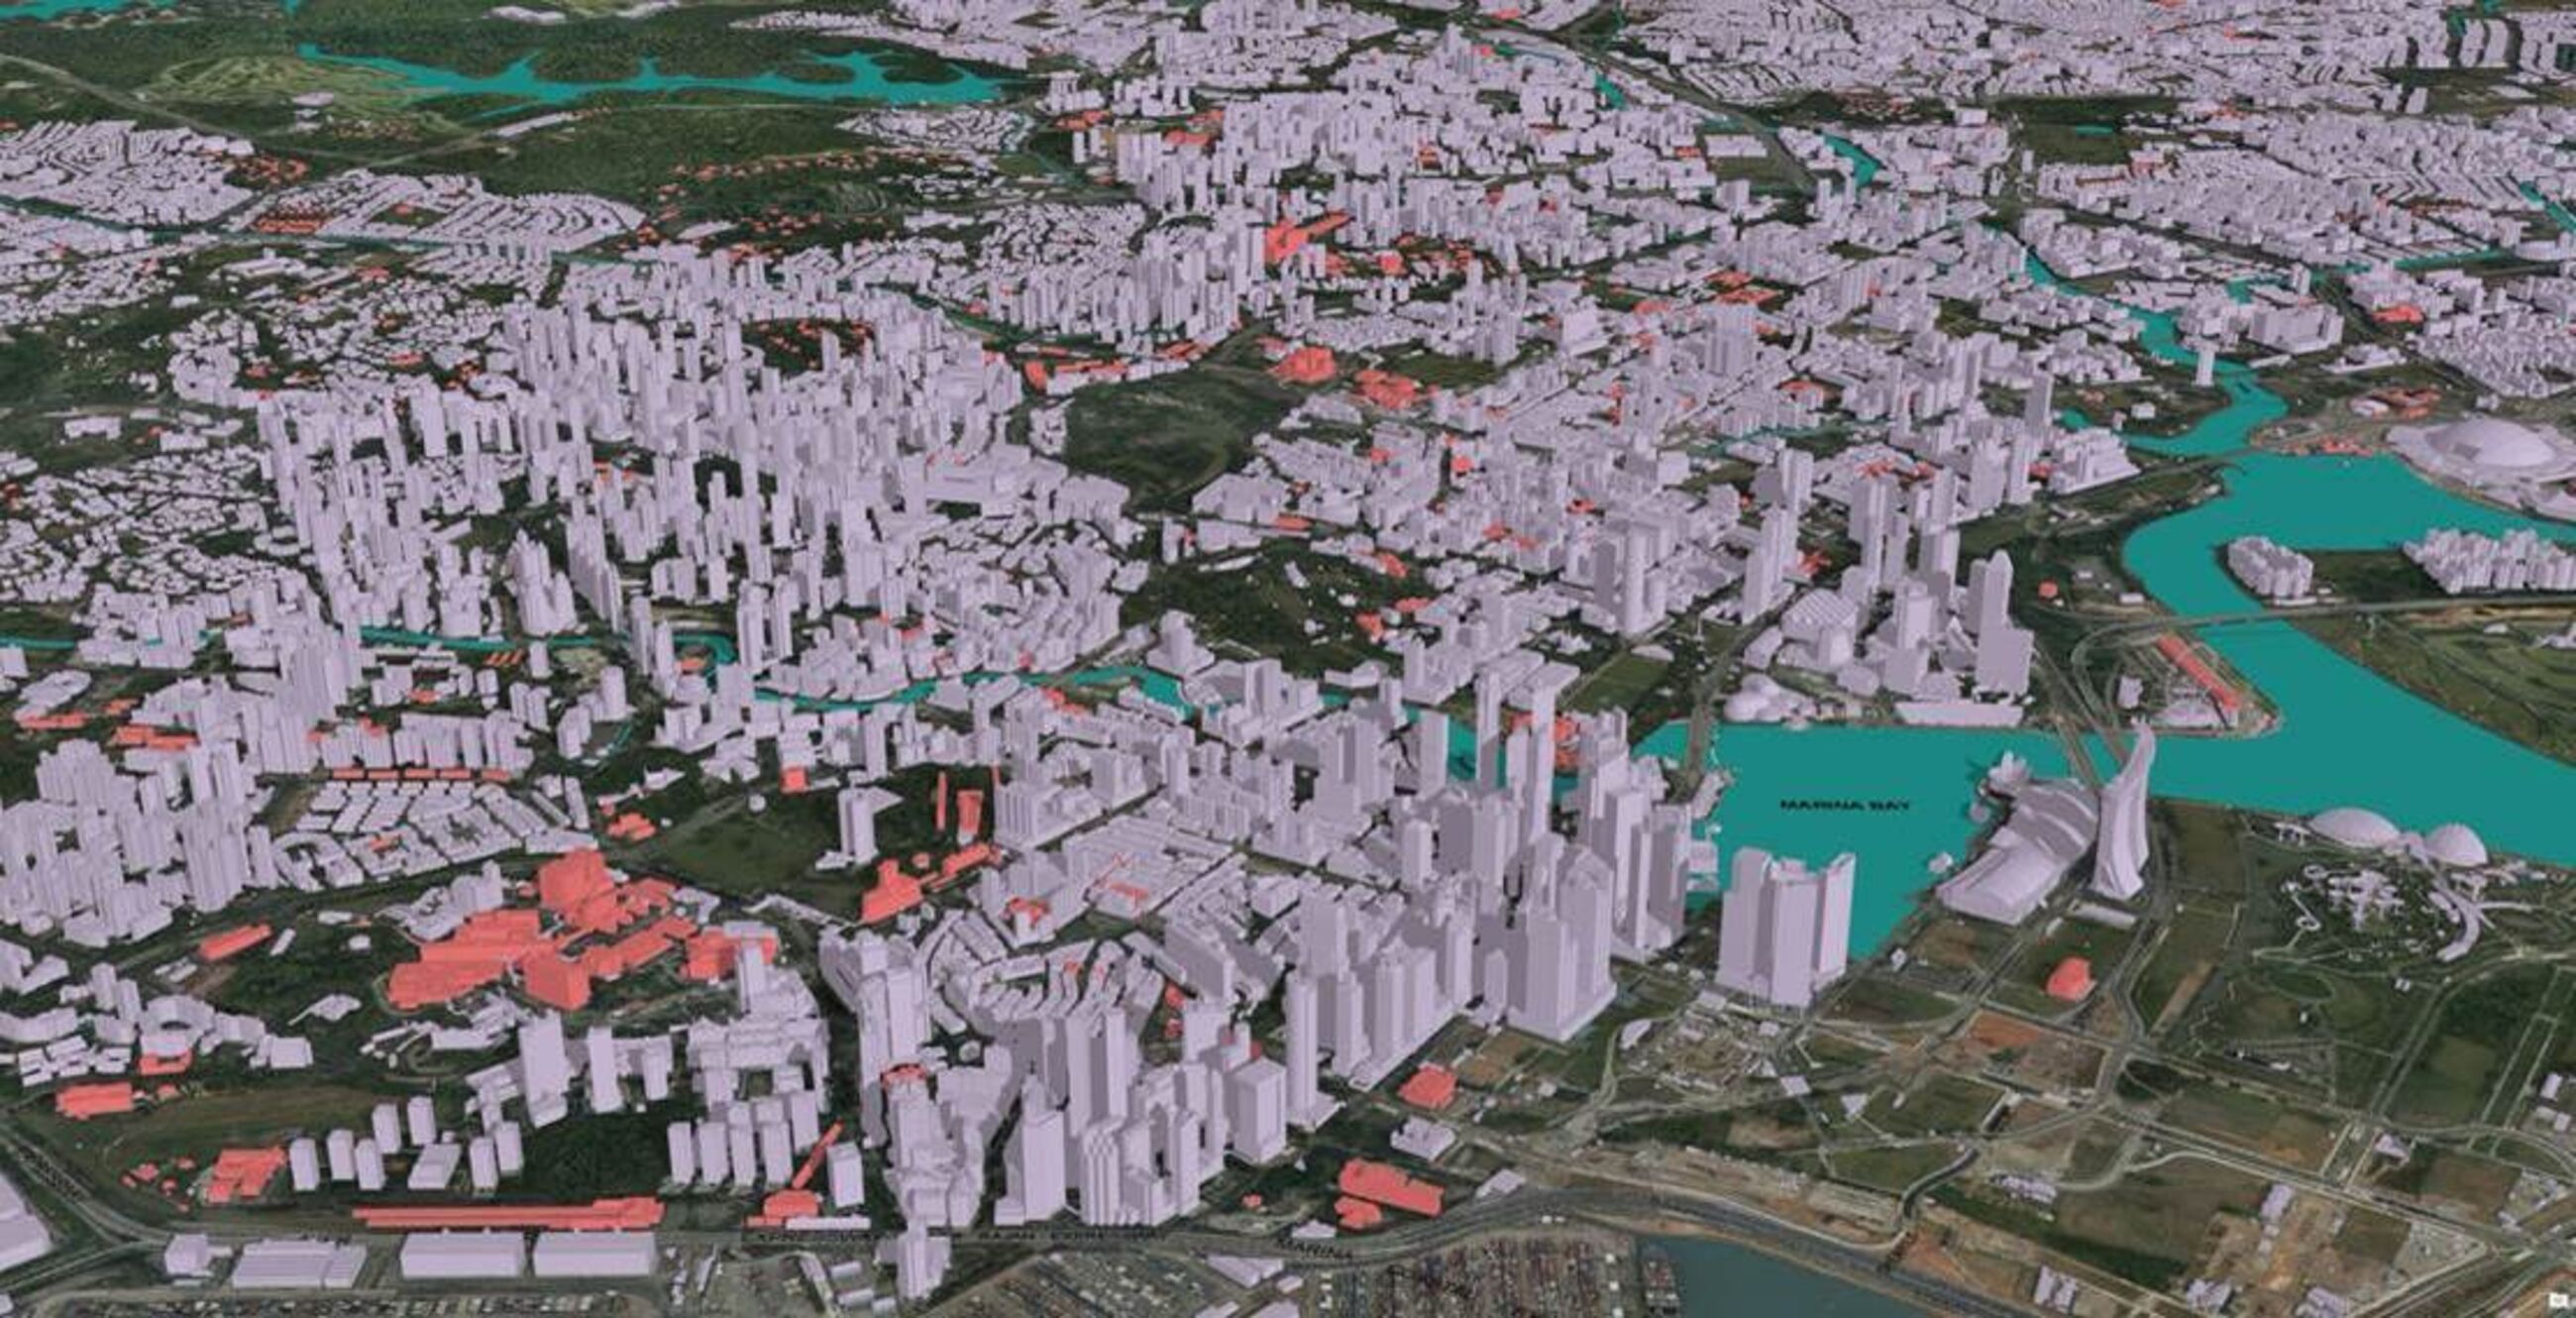 Singapore’s digital model relies on massive amounts of data, including the footprint of every single building on the island-nation. 